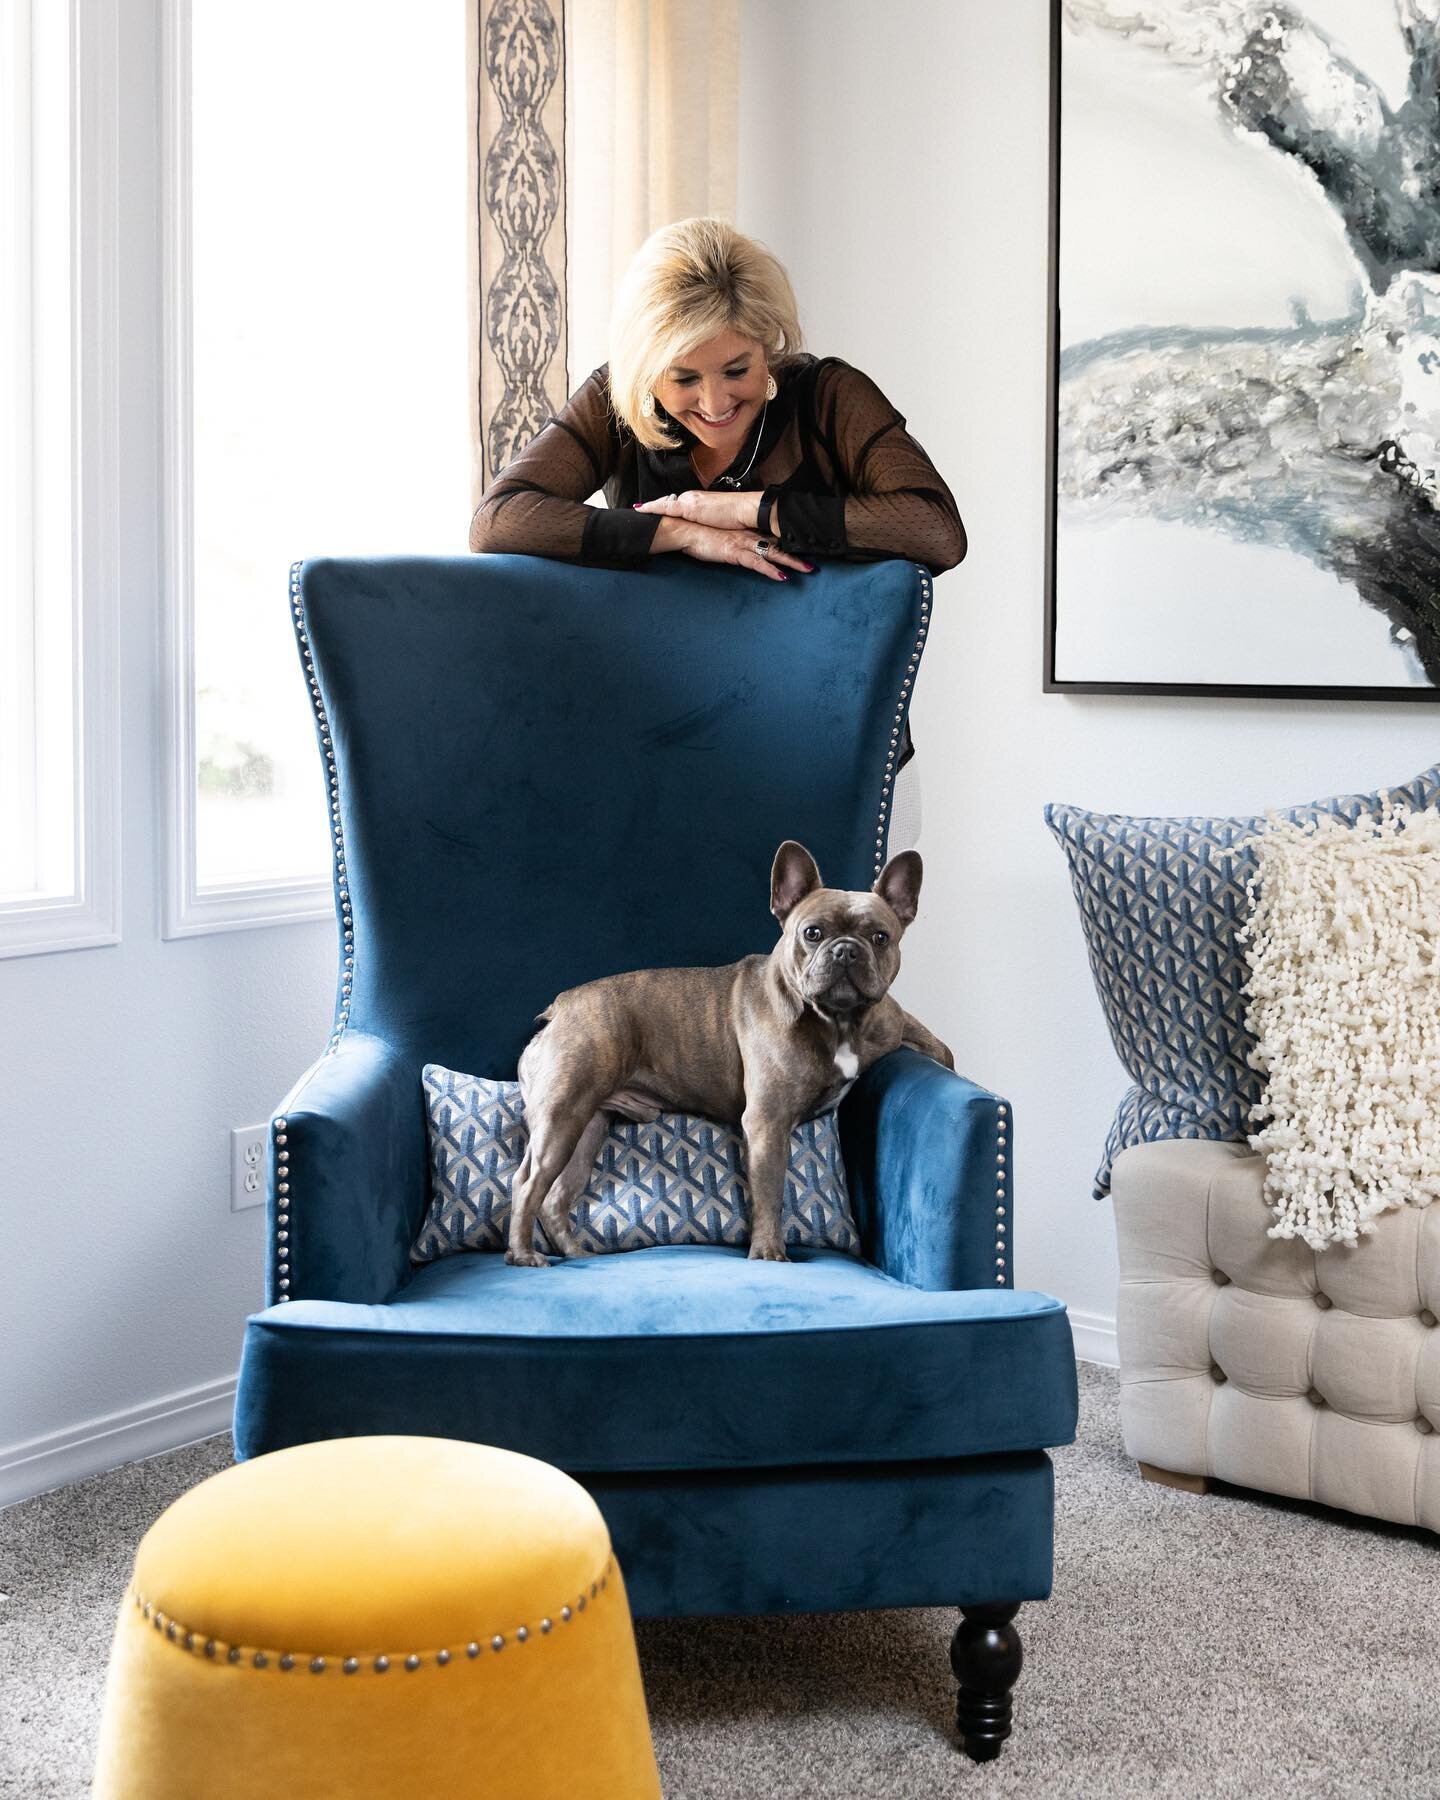 &ldquo;Can I bring my dog to my lifestyle session?&rdquo;

Yes, yes &amp; yes! (Especially if you have an adorable Frenchie.) 🤩

I had so much fun photographing local Interior Designer @marvadondecorating in her home and design studio. If you&rsquo;